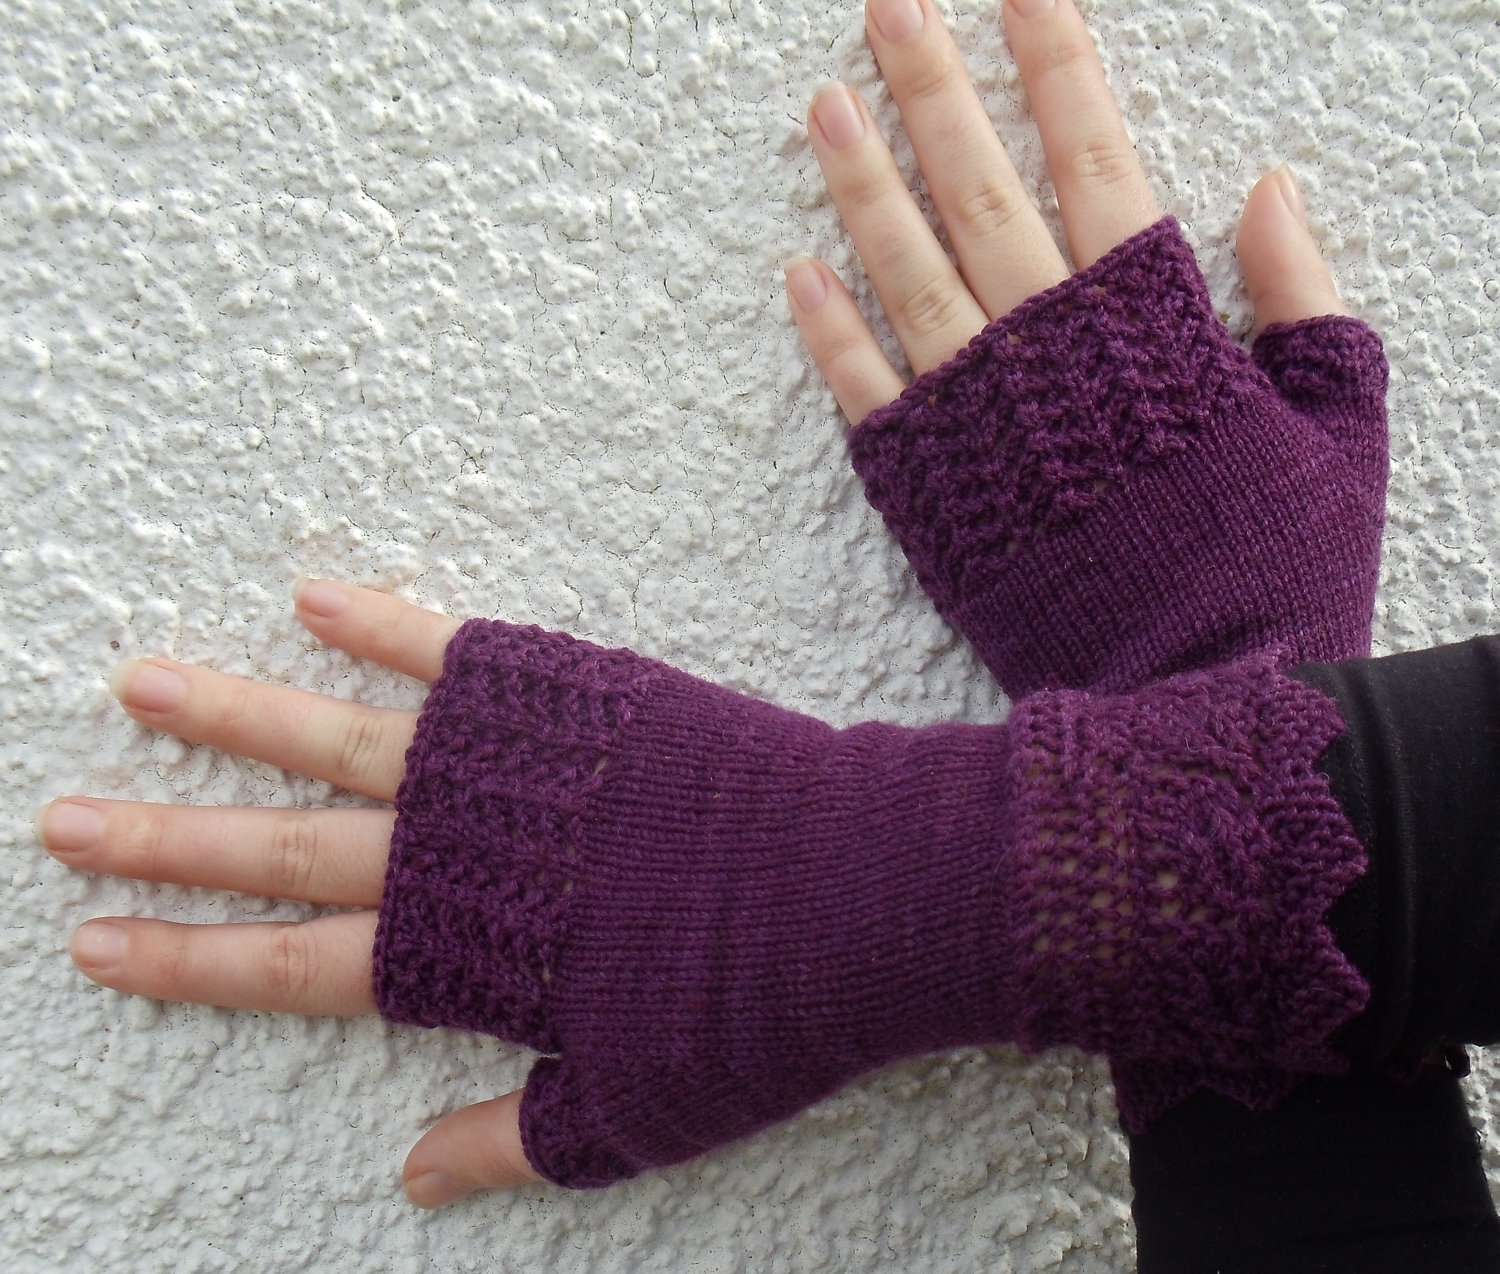 A simple and useful bulky fingerless gloves knitting pattern